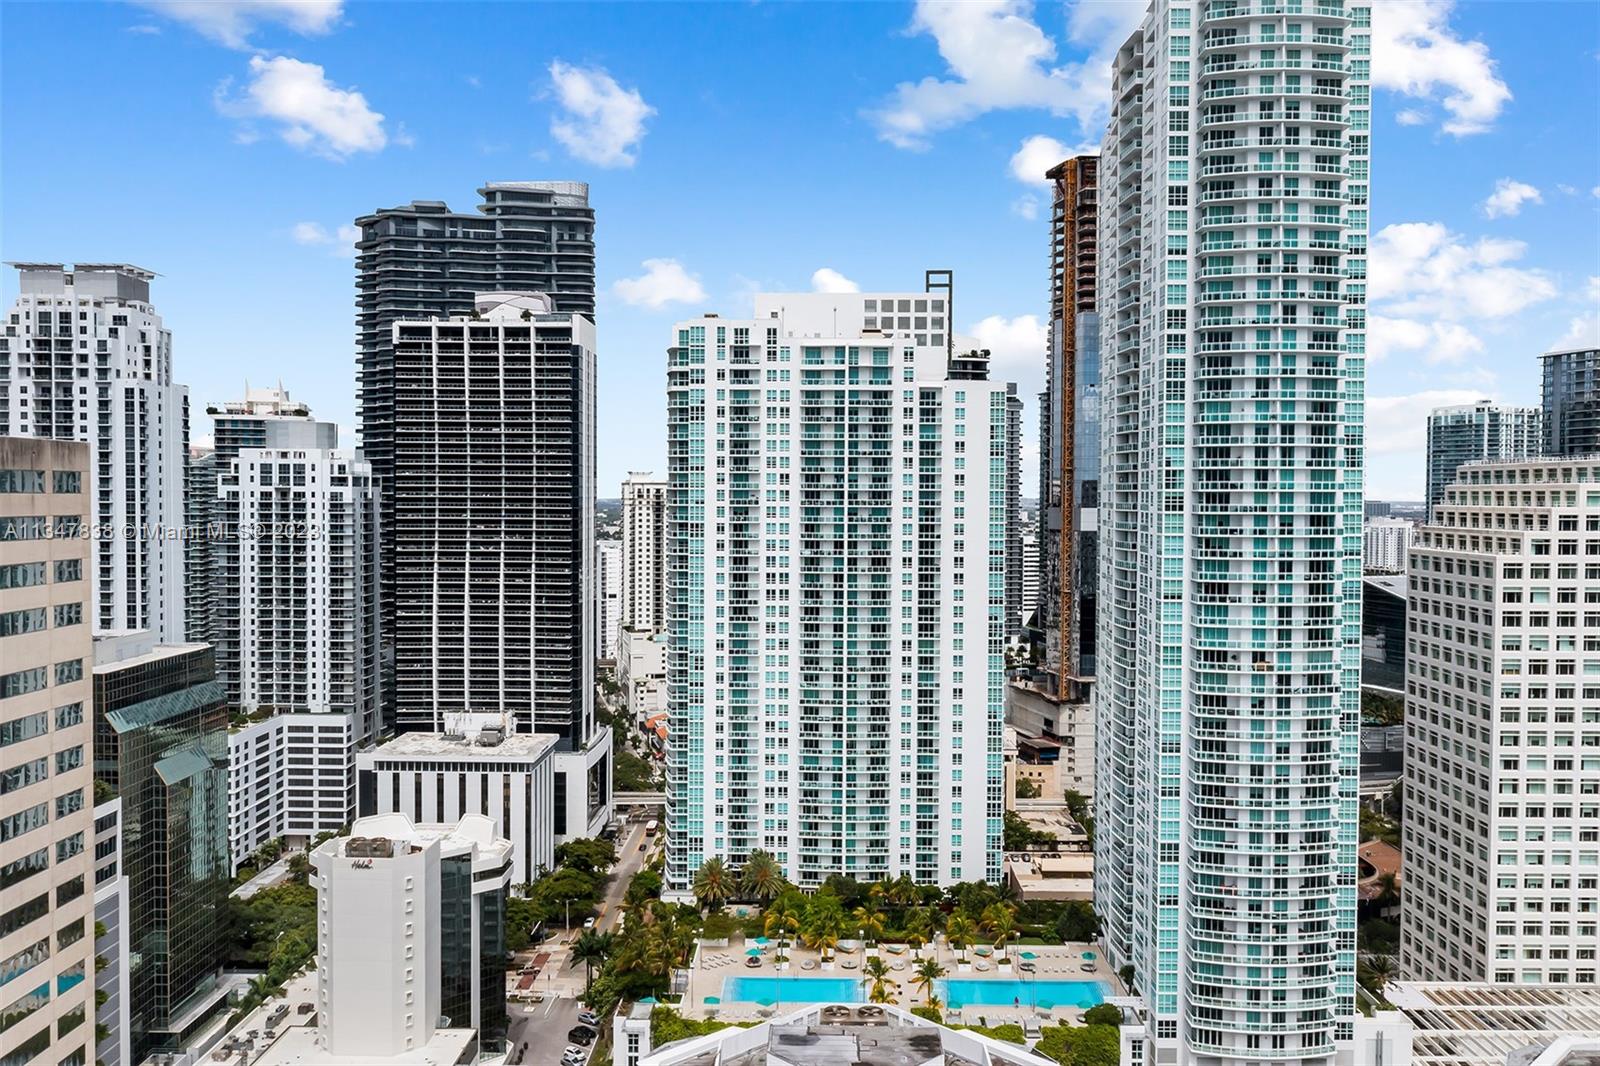 The Plaza on Brickell South image #48